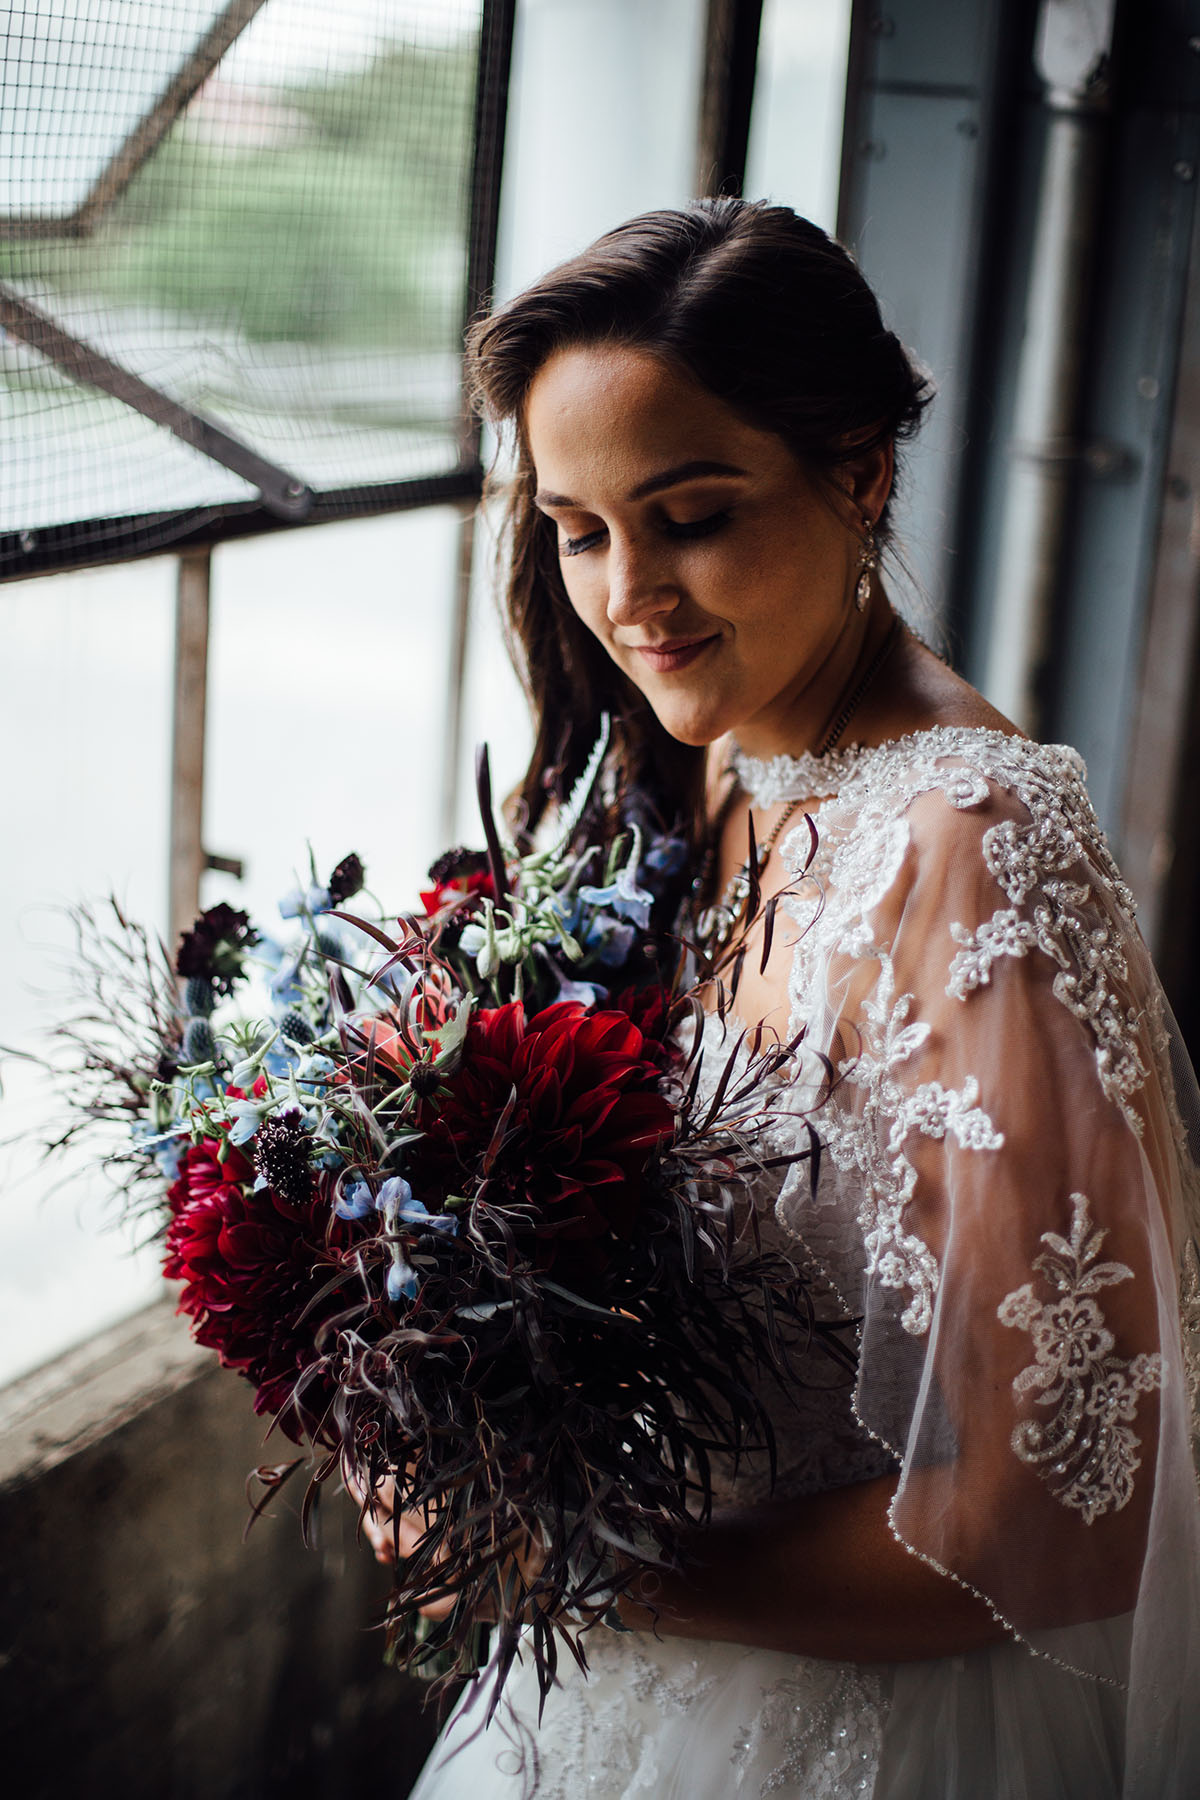 Pop-up styled lesbian wedding shoot in grays and blues bouquet flowers